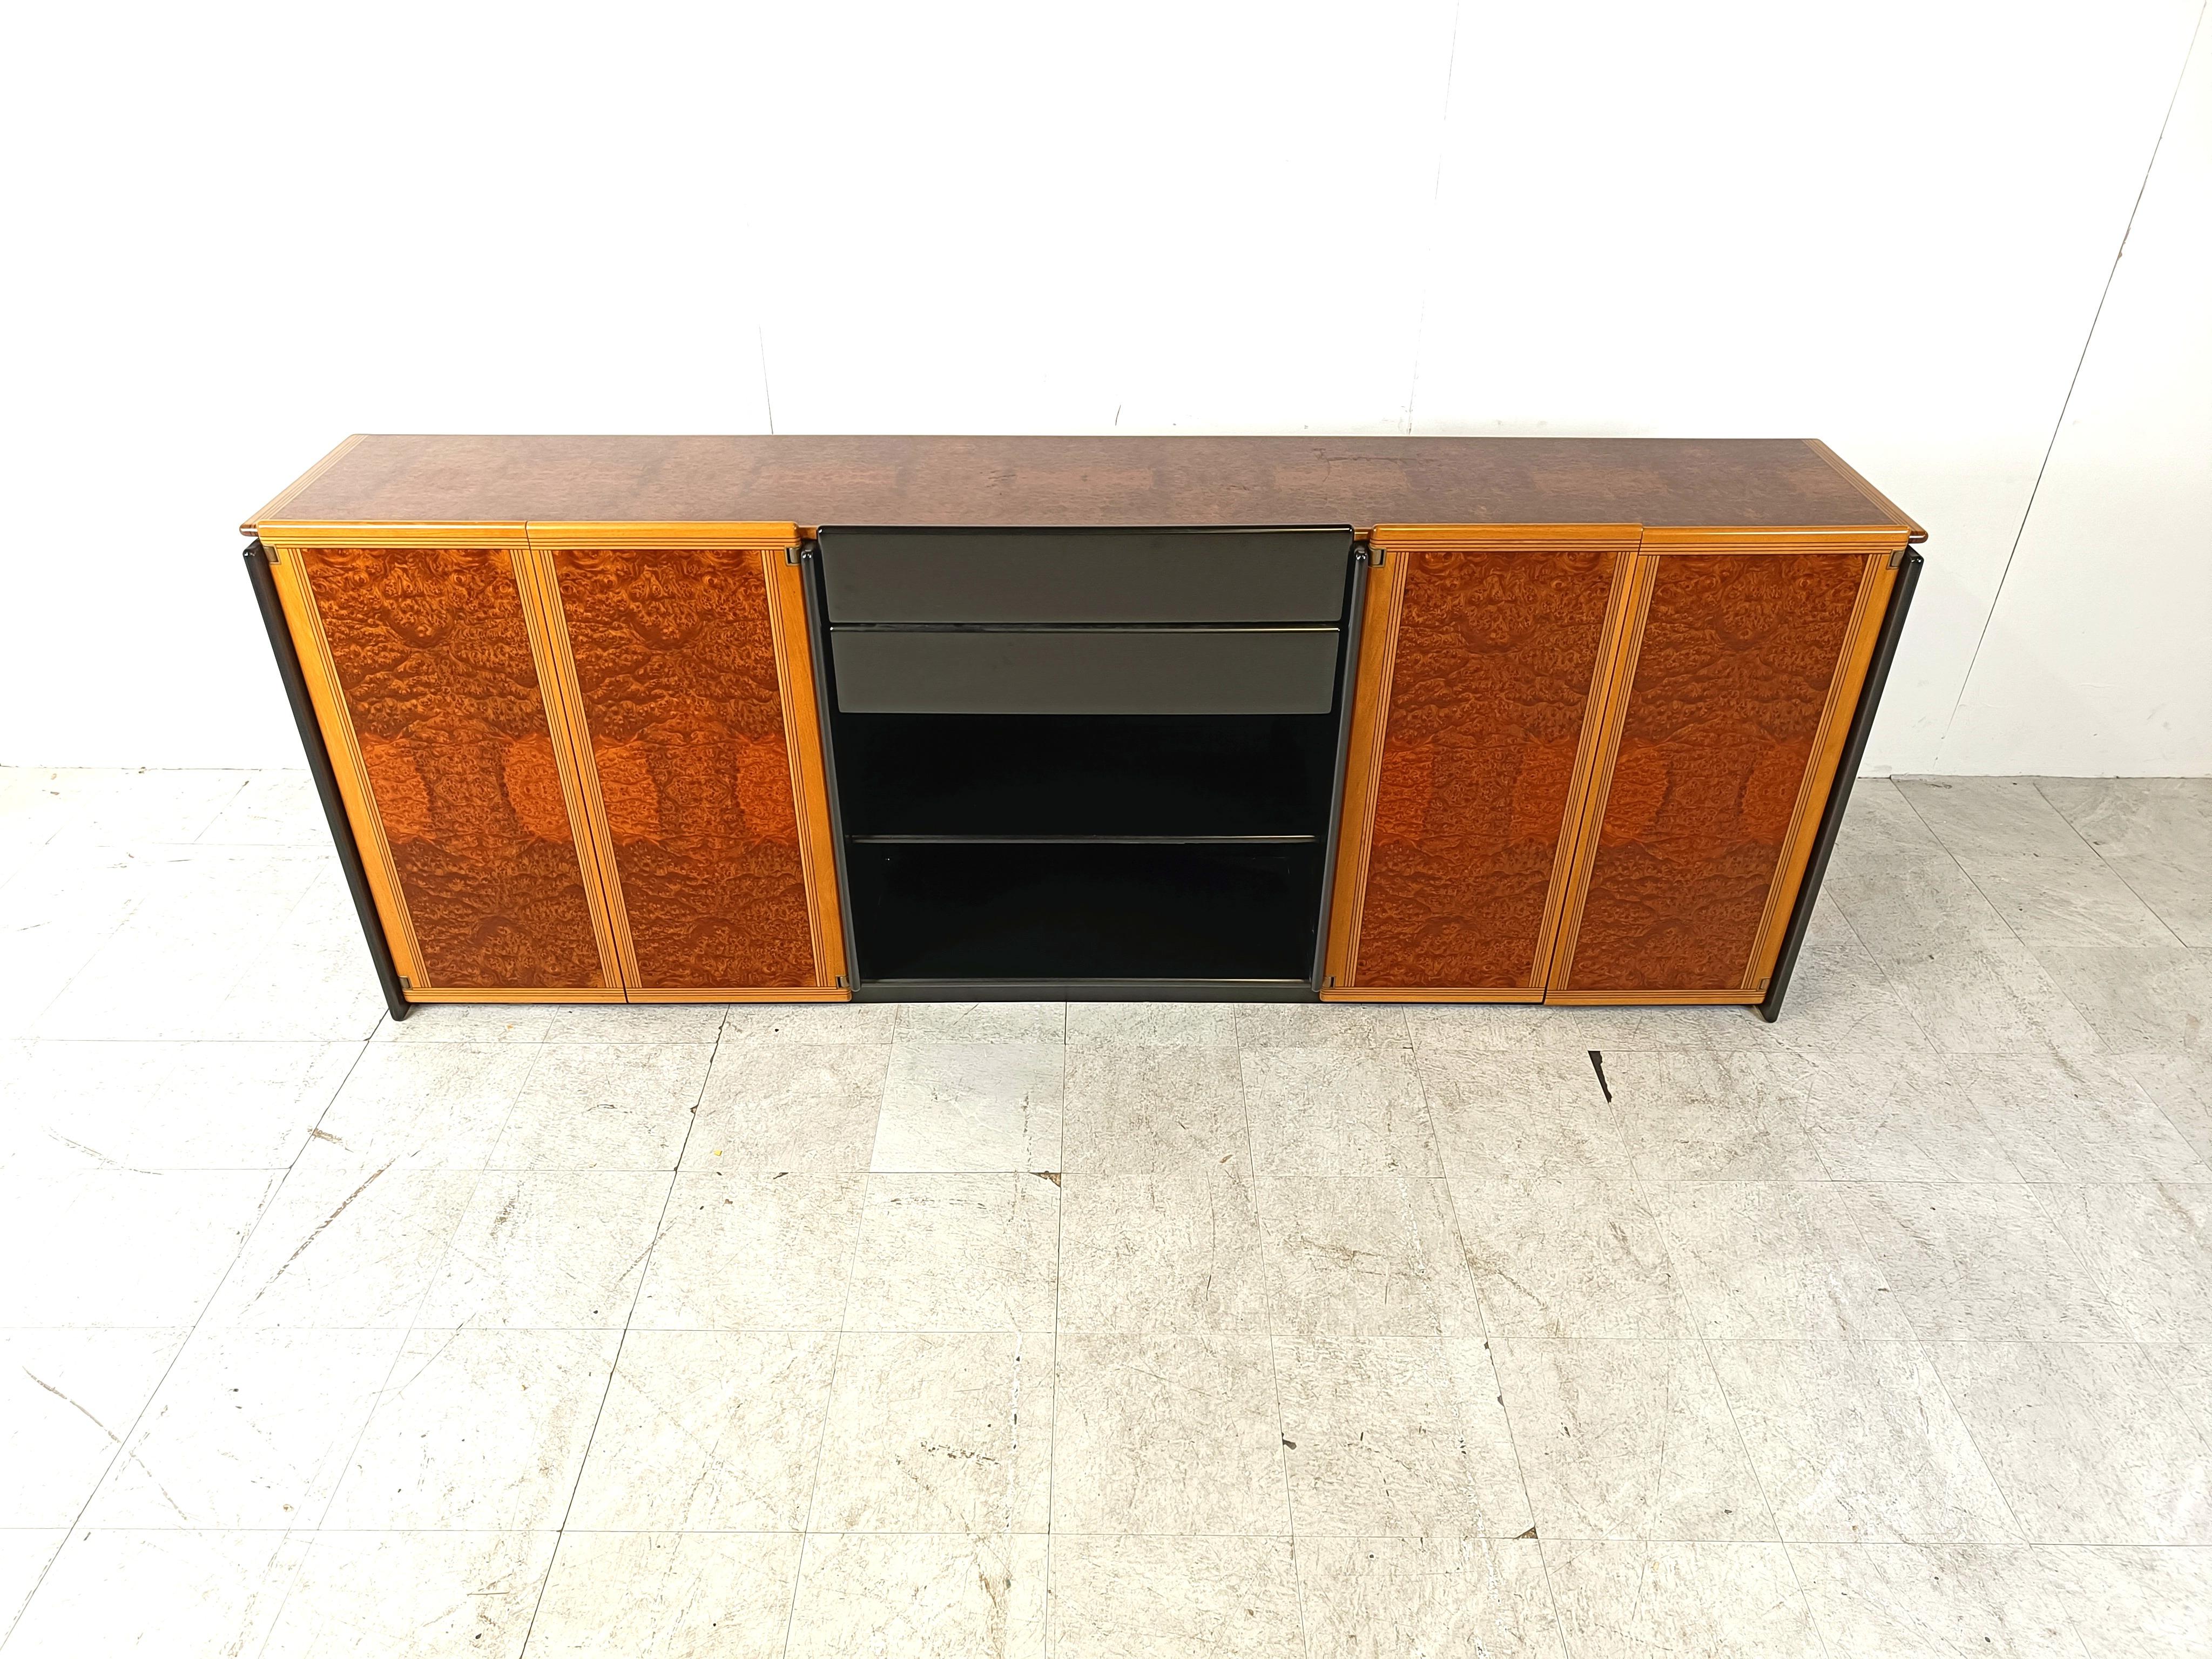 Striking sideboard by Tobia Scarpa

The use of the finest woods and craftmenship resulsts in this mind blowing sideboard.

Notice the fine black lines running troughout and the incredible finish of the wooden panels.

This sideboard is ideal  to